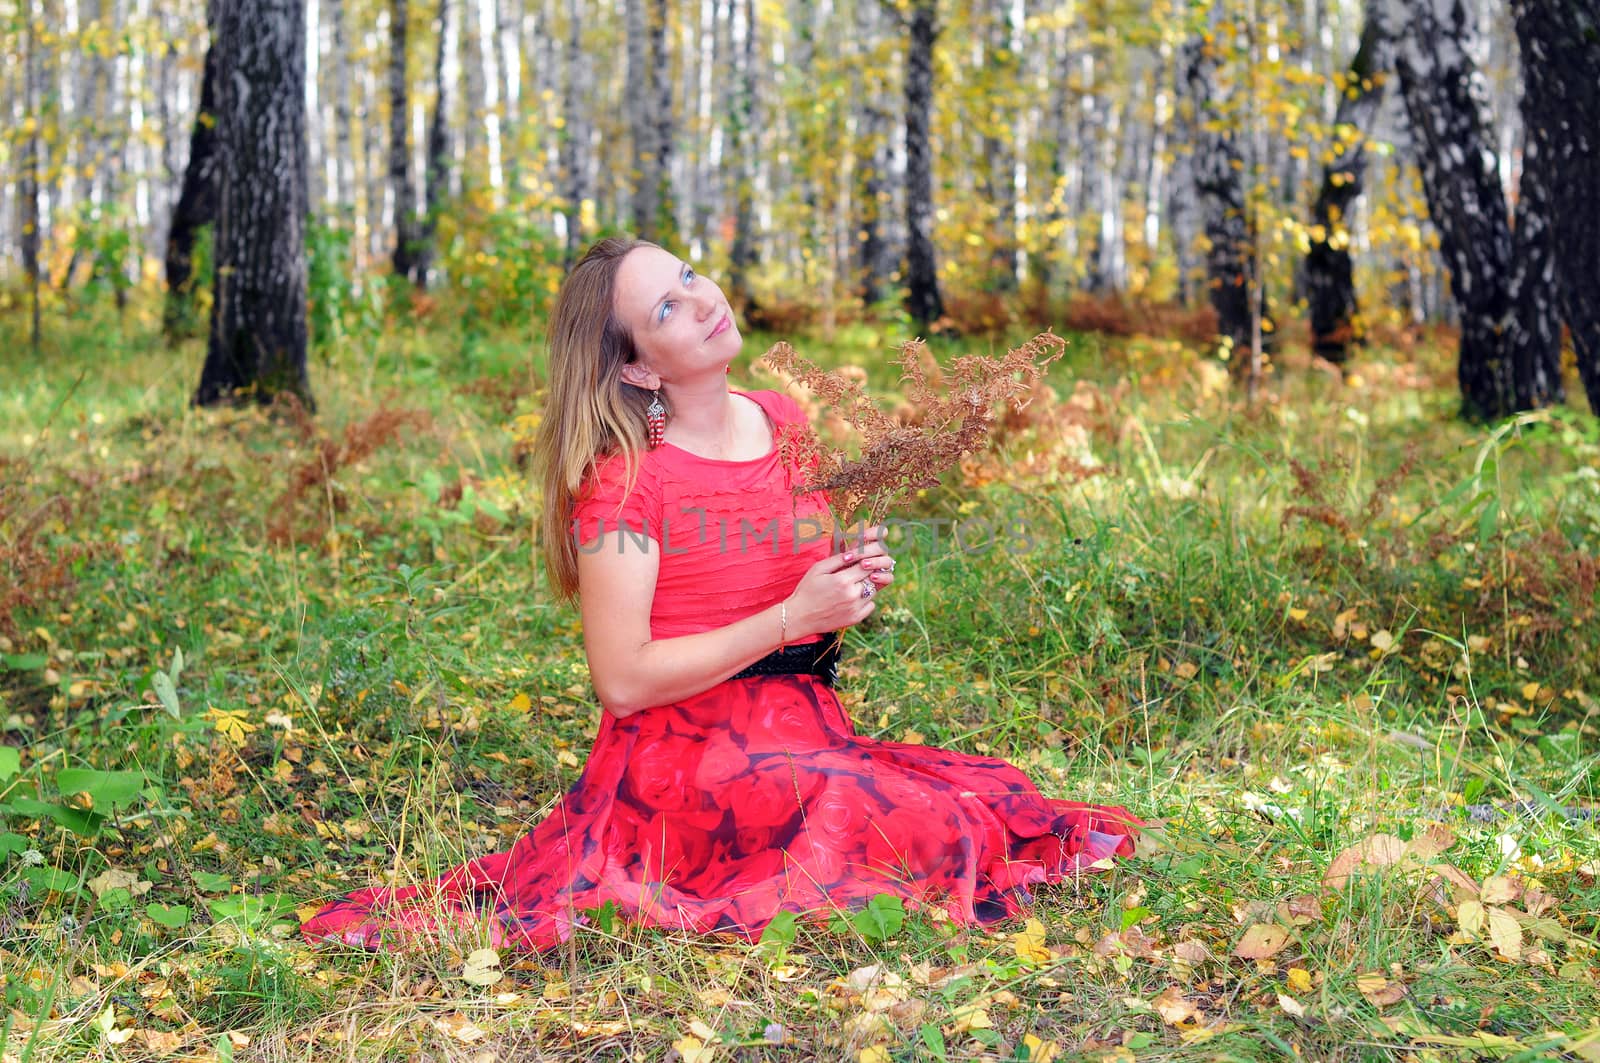 the beautiful woman in red clothes in the autumn wood by veronka72